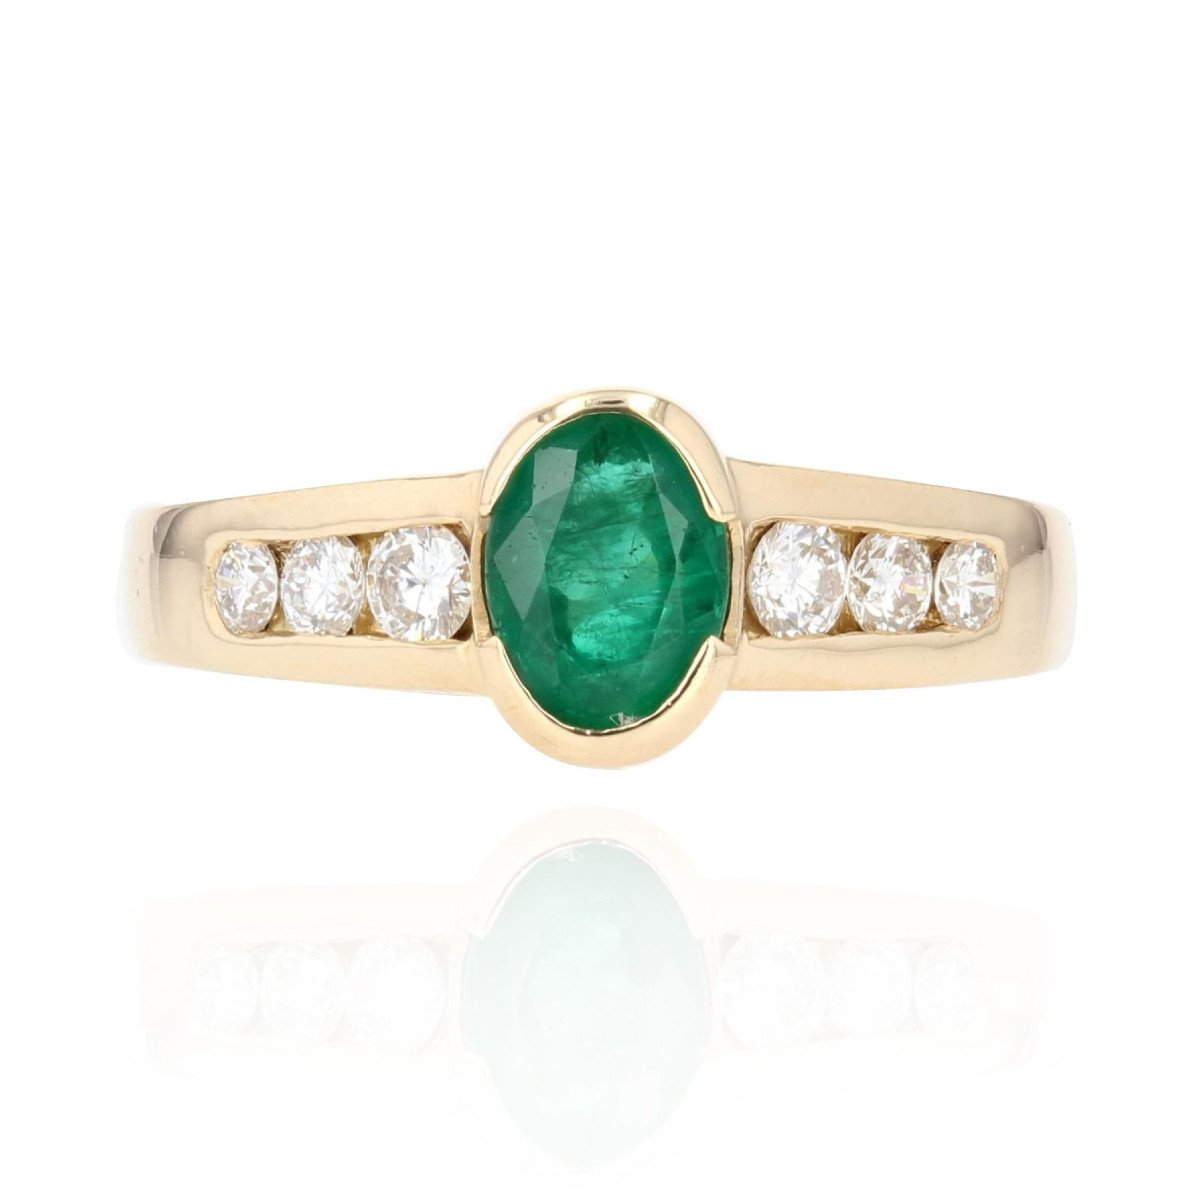 Pre-Owned 9ct Gold Diamond & Emerald Ring | 9ct Gold Emerald Ring | Second  Hand Diamond Ring